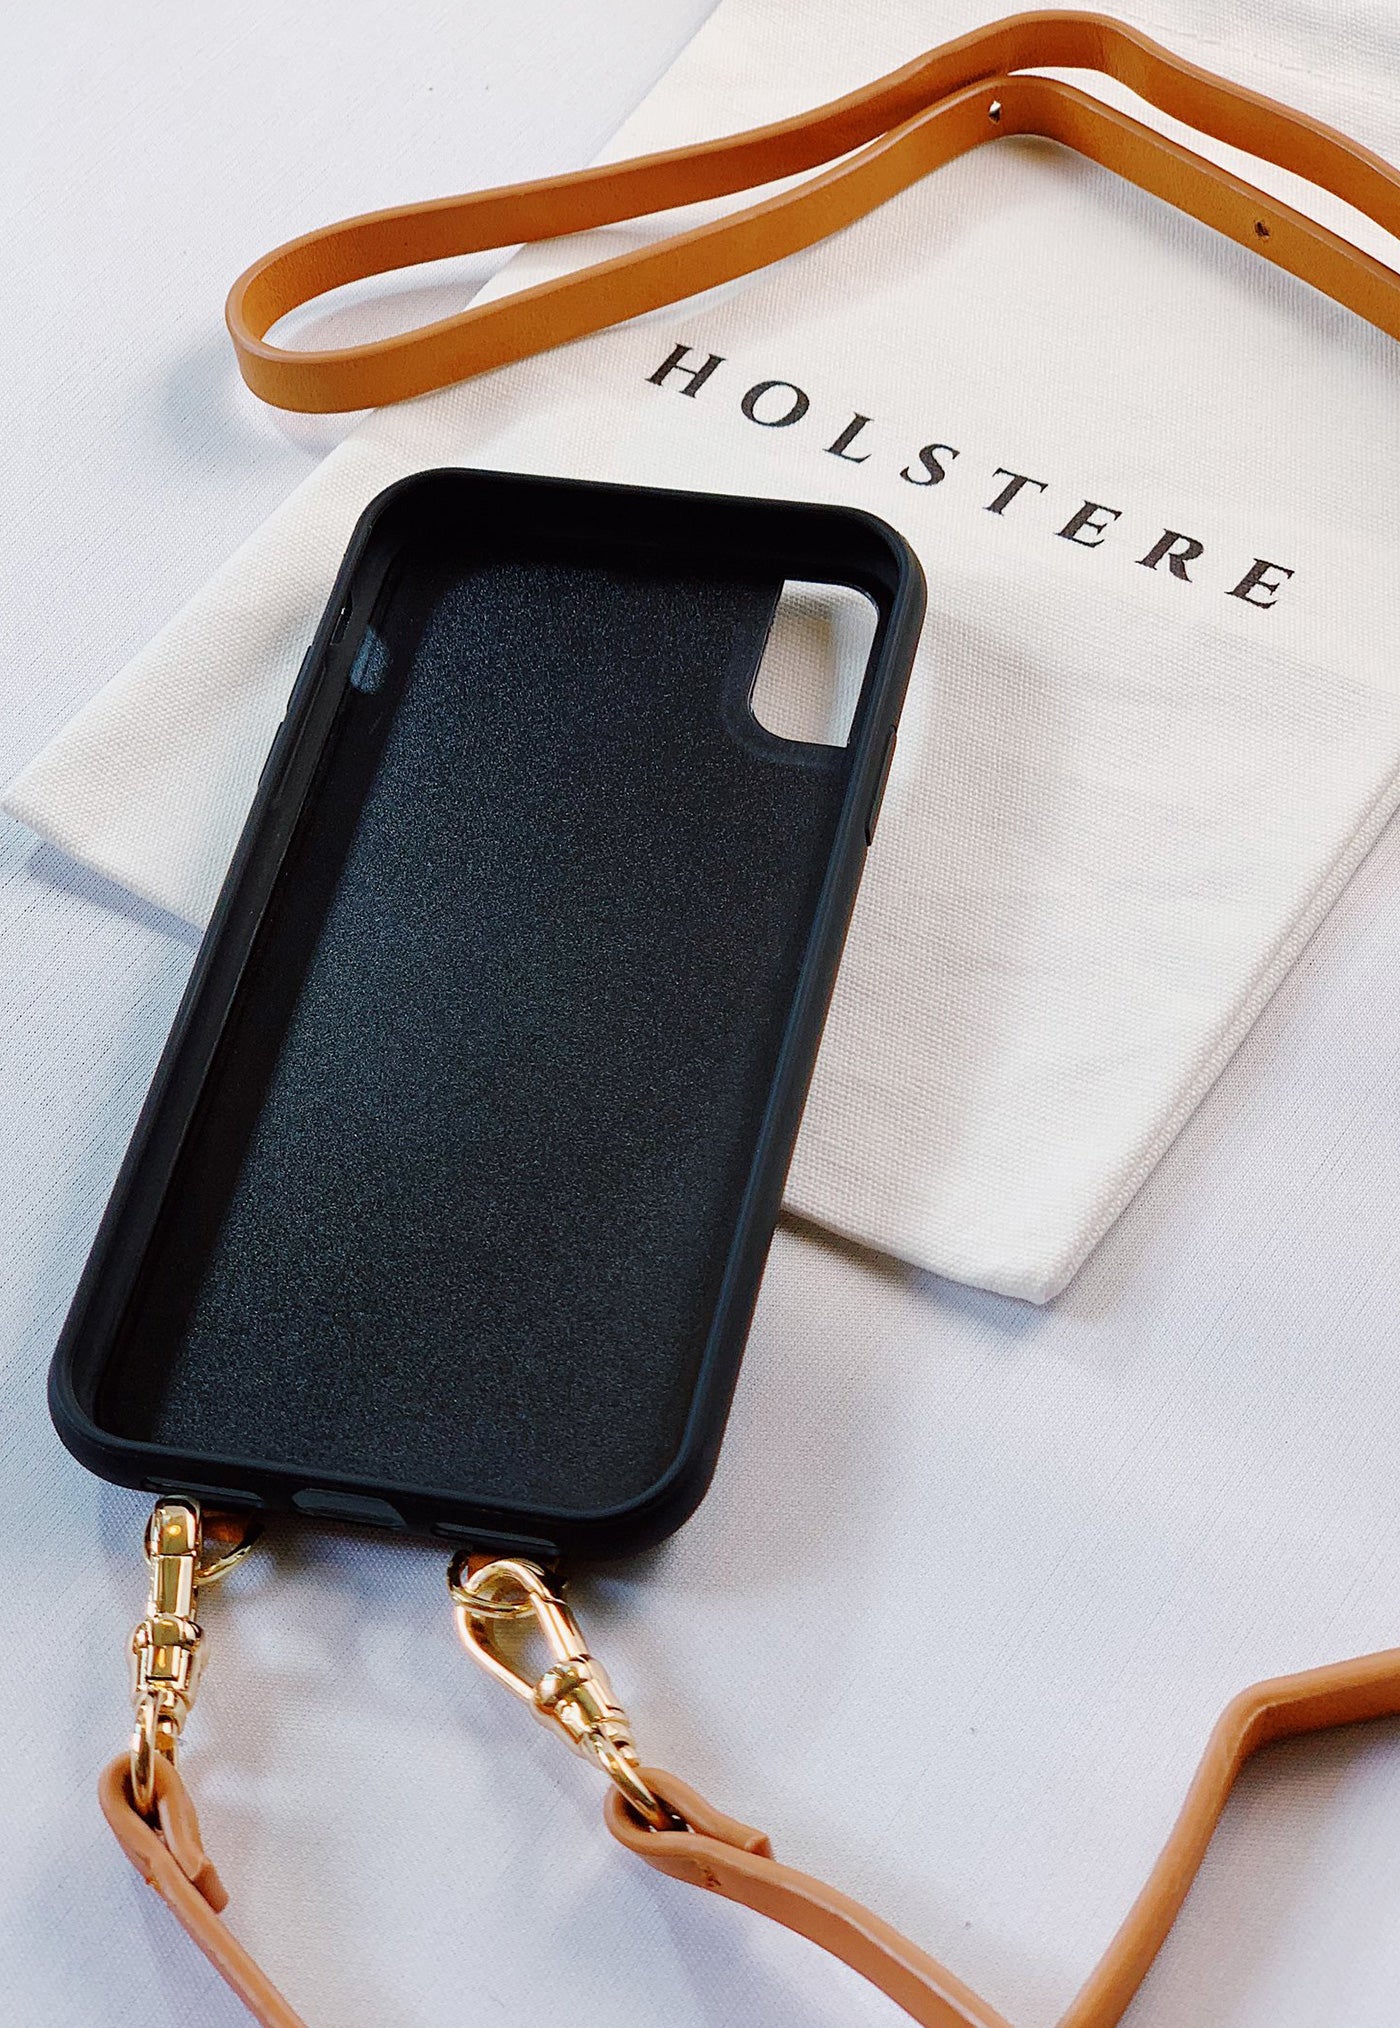 Holstere - London iPhone Case - Tan sold by Angel Divine